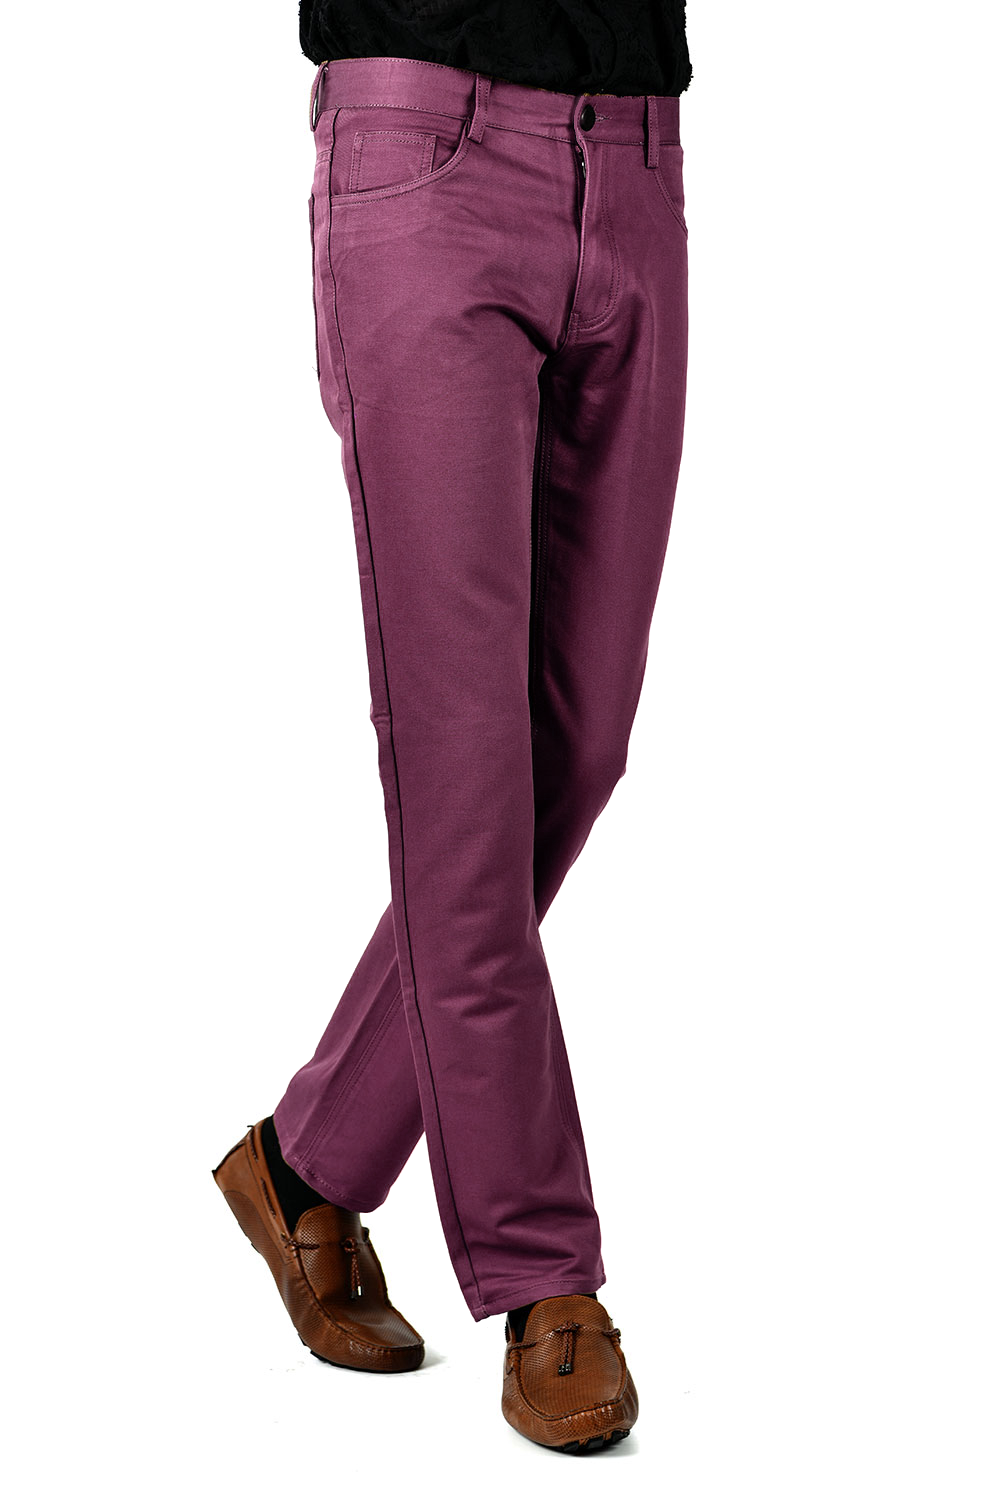 Barabas Men's Solid Color Zip and Wine Straight Fit Pants B2060